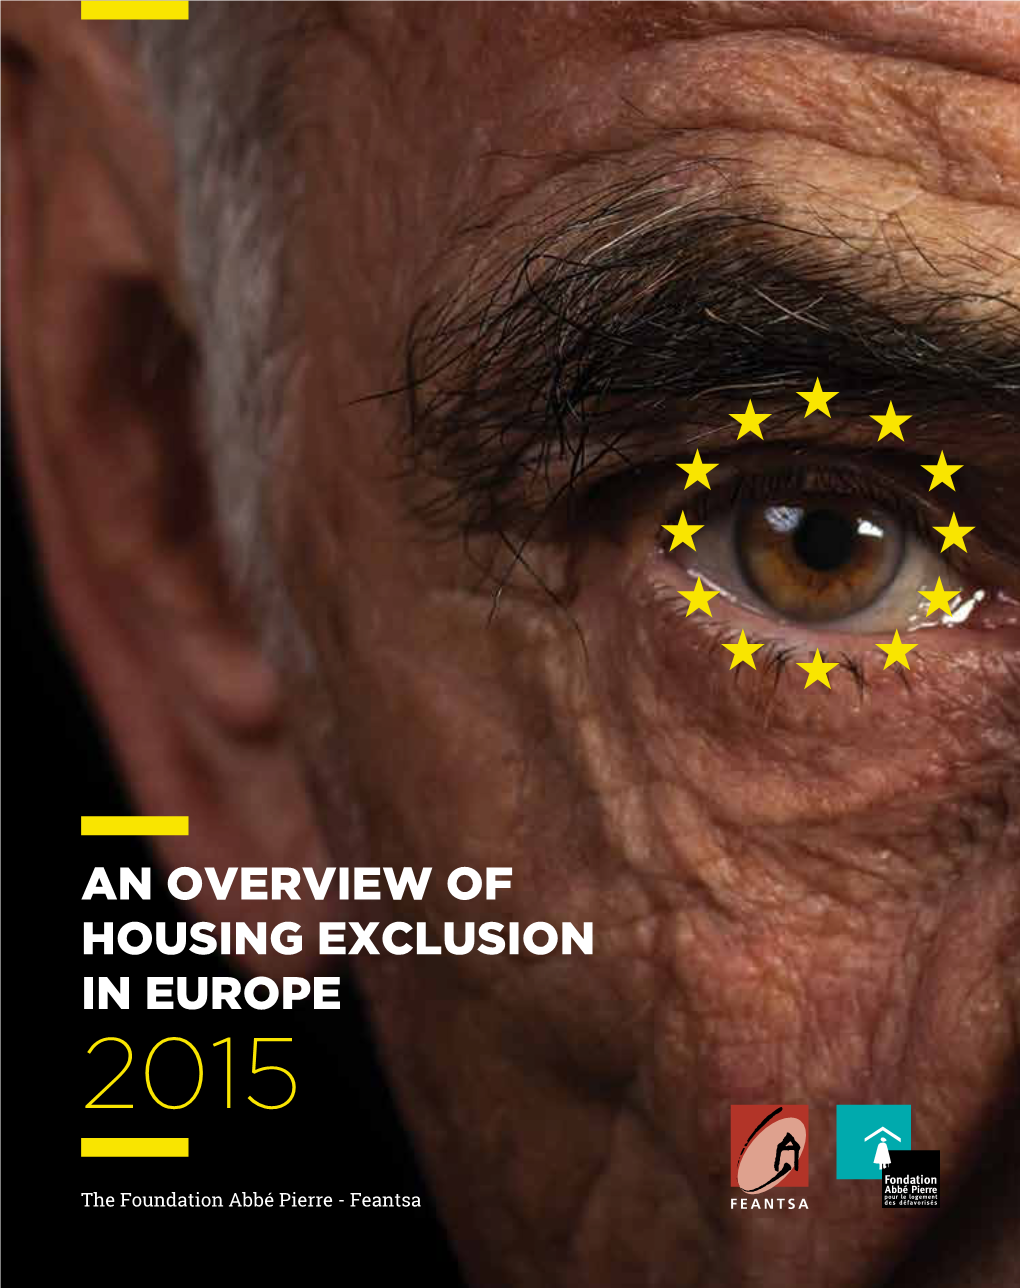 An Overview of Housing Exclusion in Europe 2015